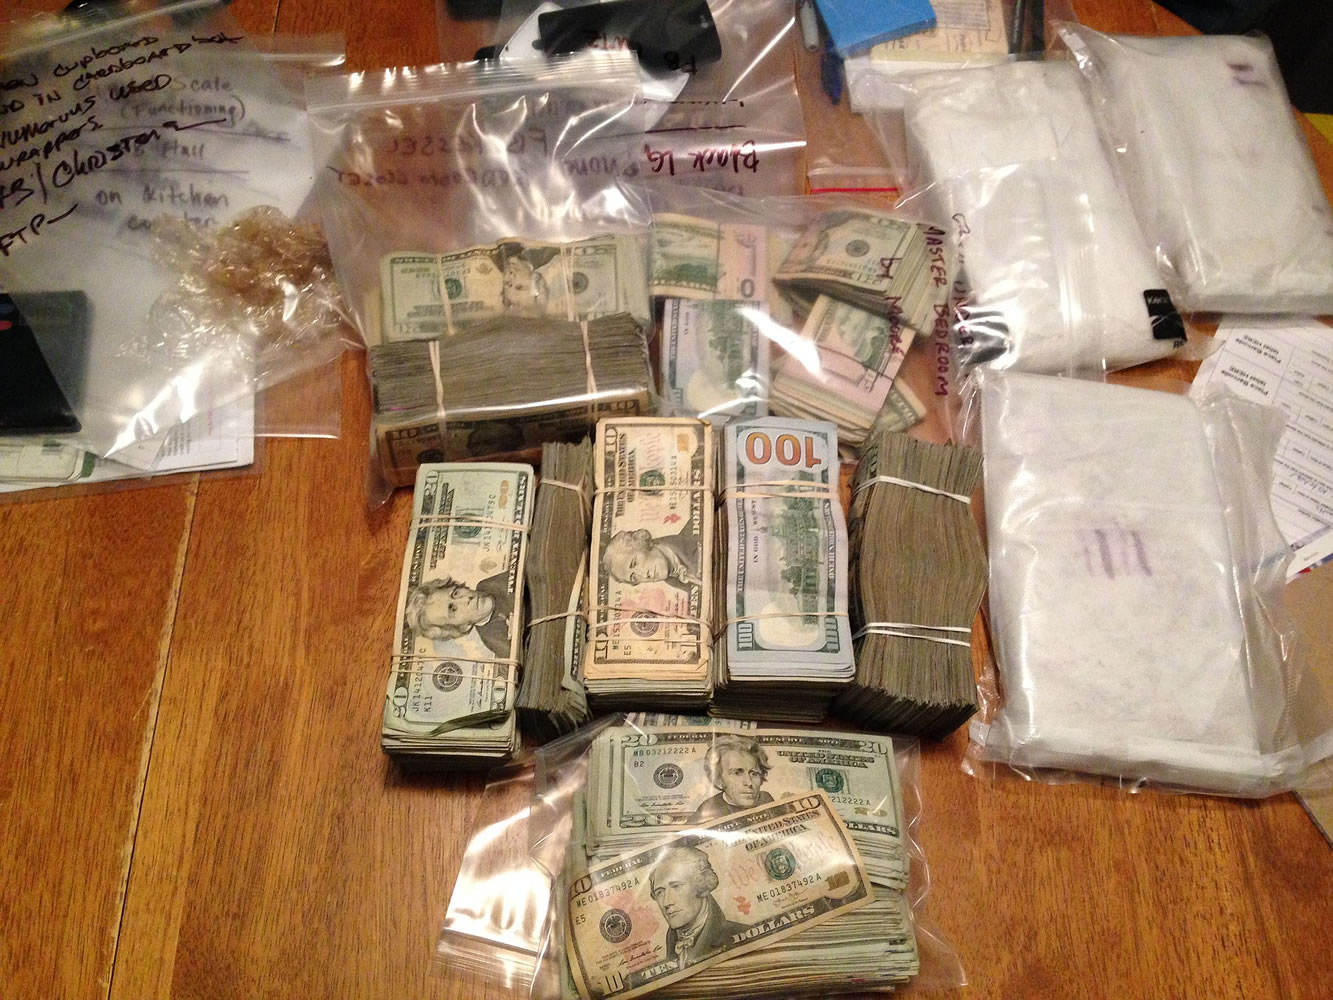 Law enforcement seized 3.6 pounds of heroin and  $85,440 in cash in drug bust at Hazel Dell residence.